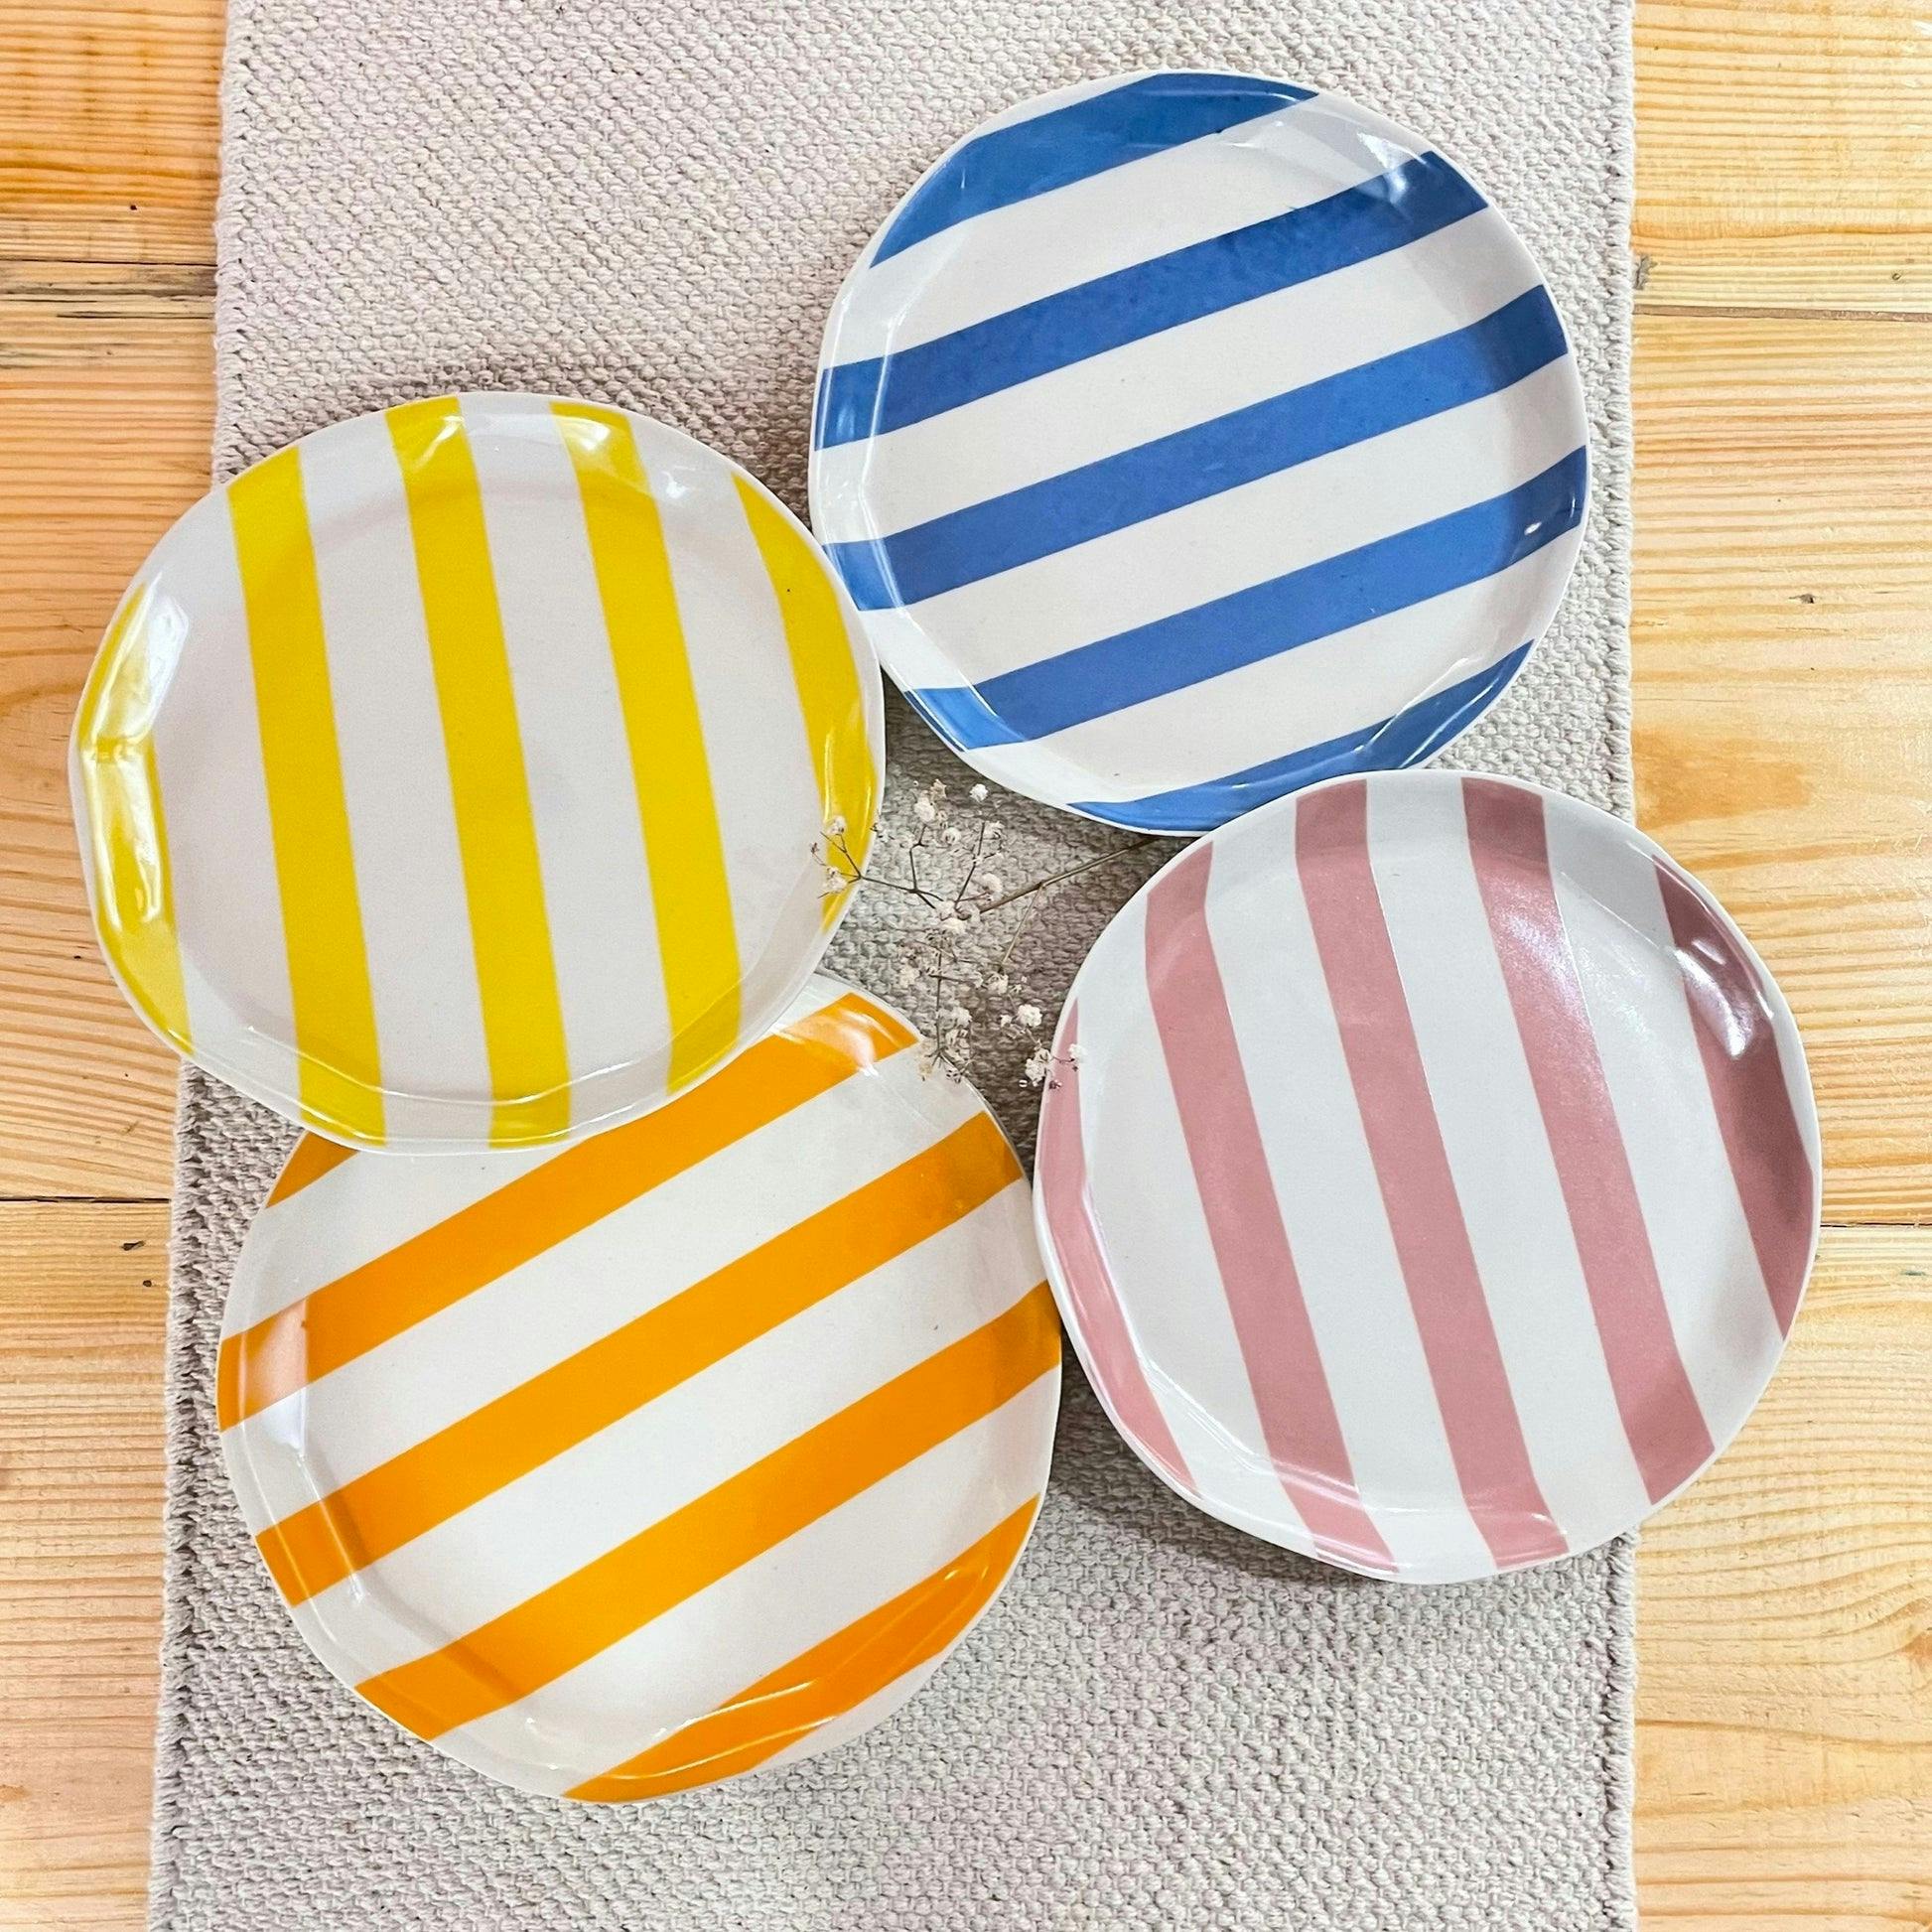 Striking Striped Plates (Set of 4), a product by Oh Yay project